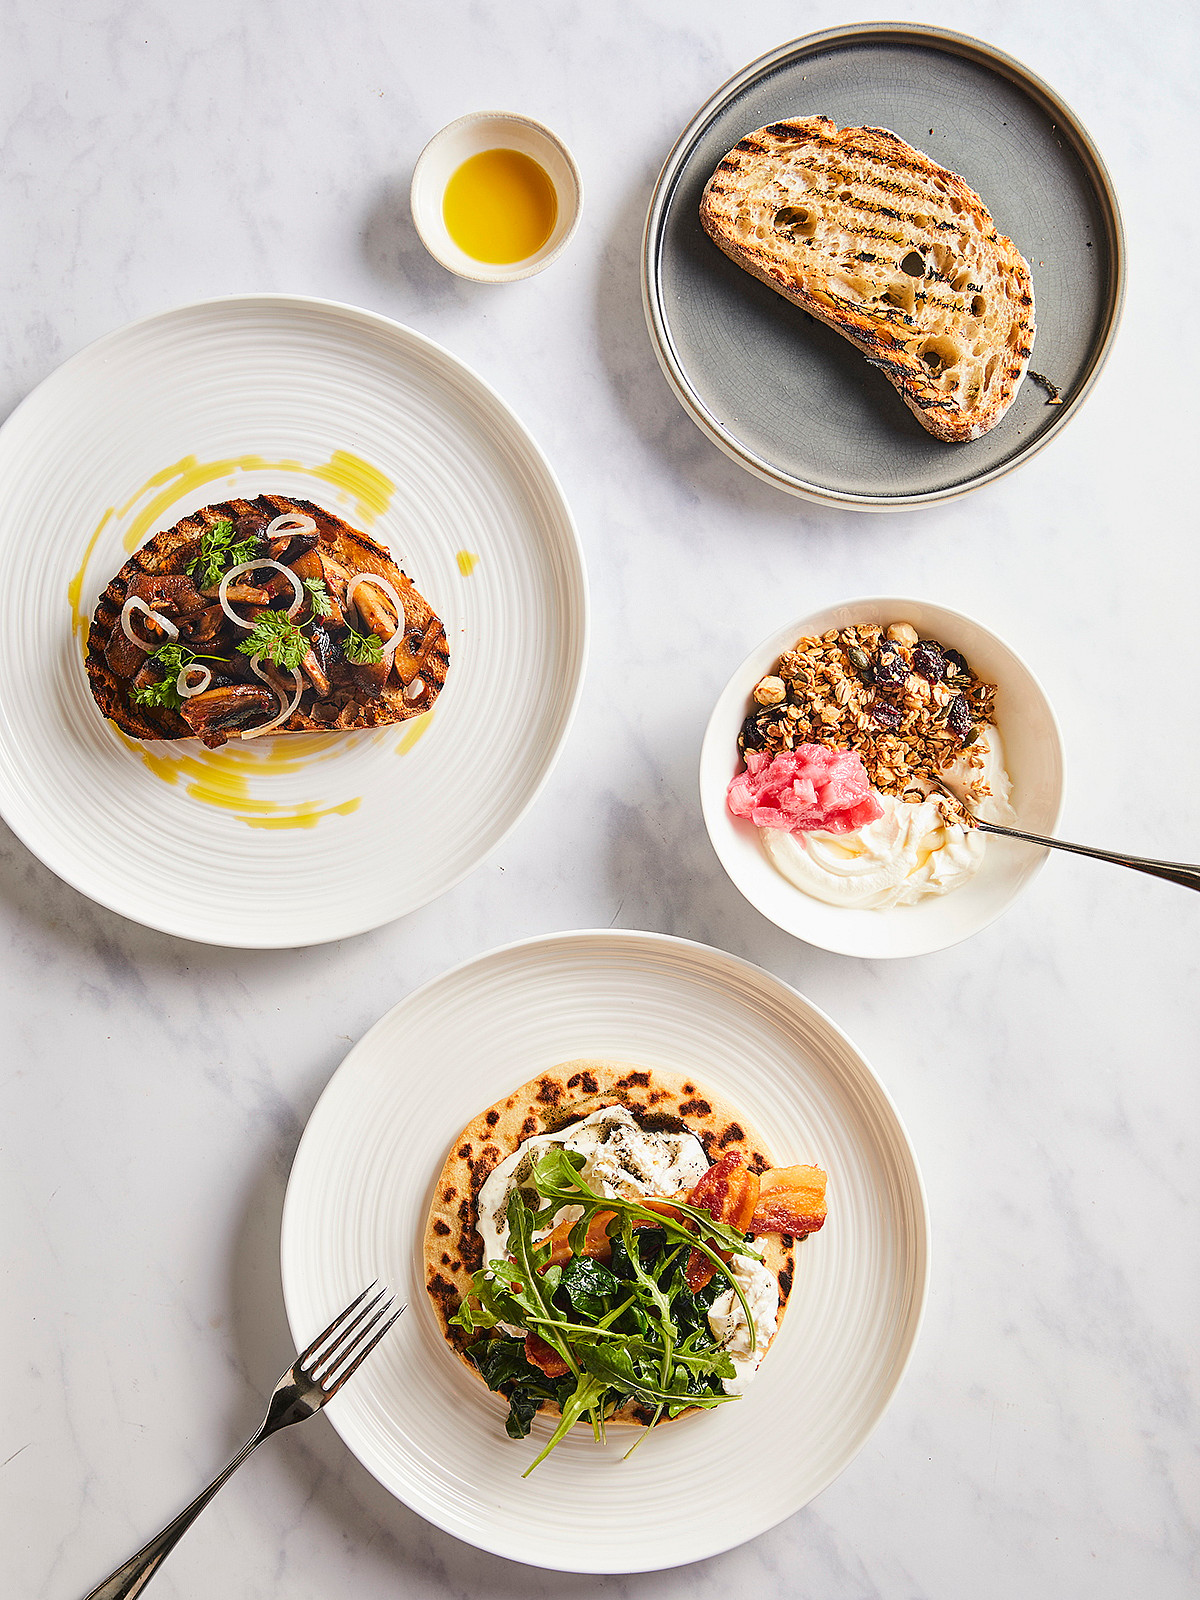 Breakfast dishes on the menu at Design restaurant by Social Pantry